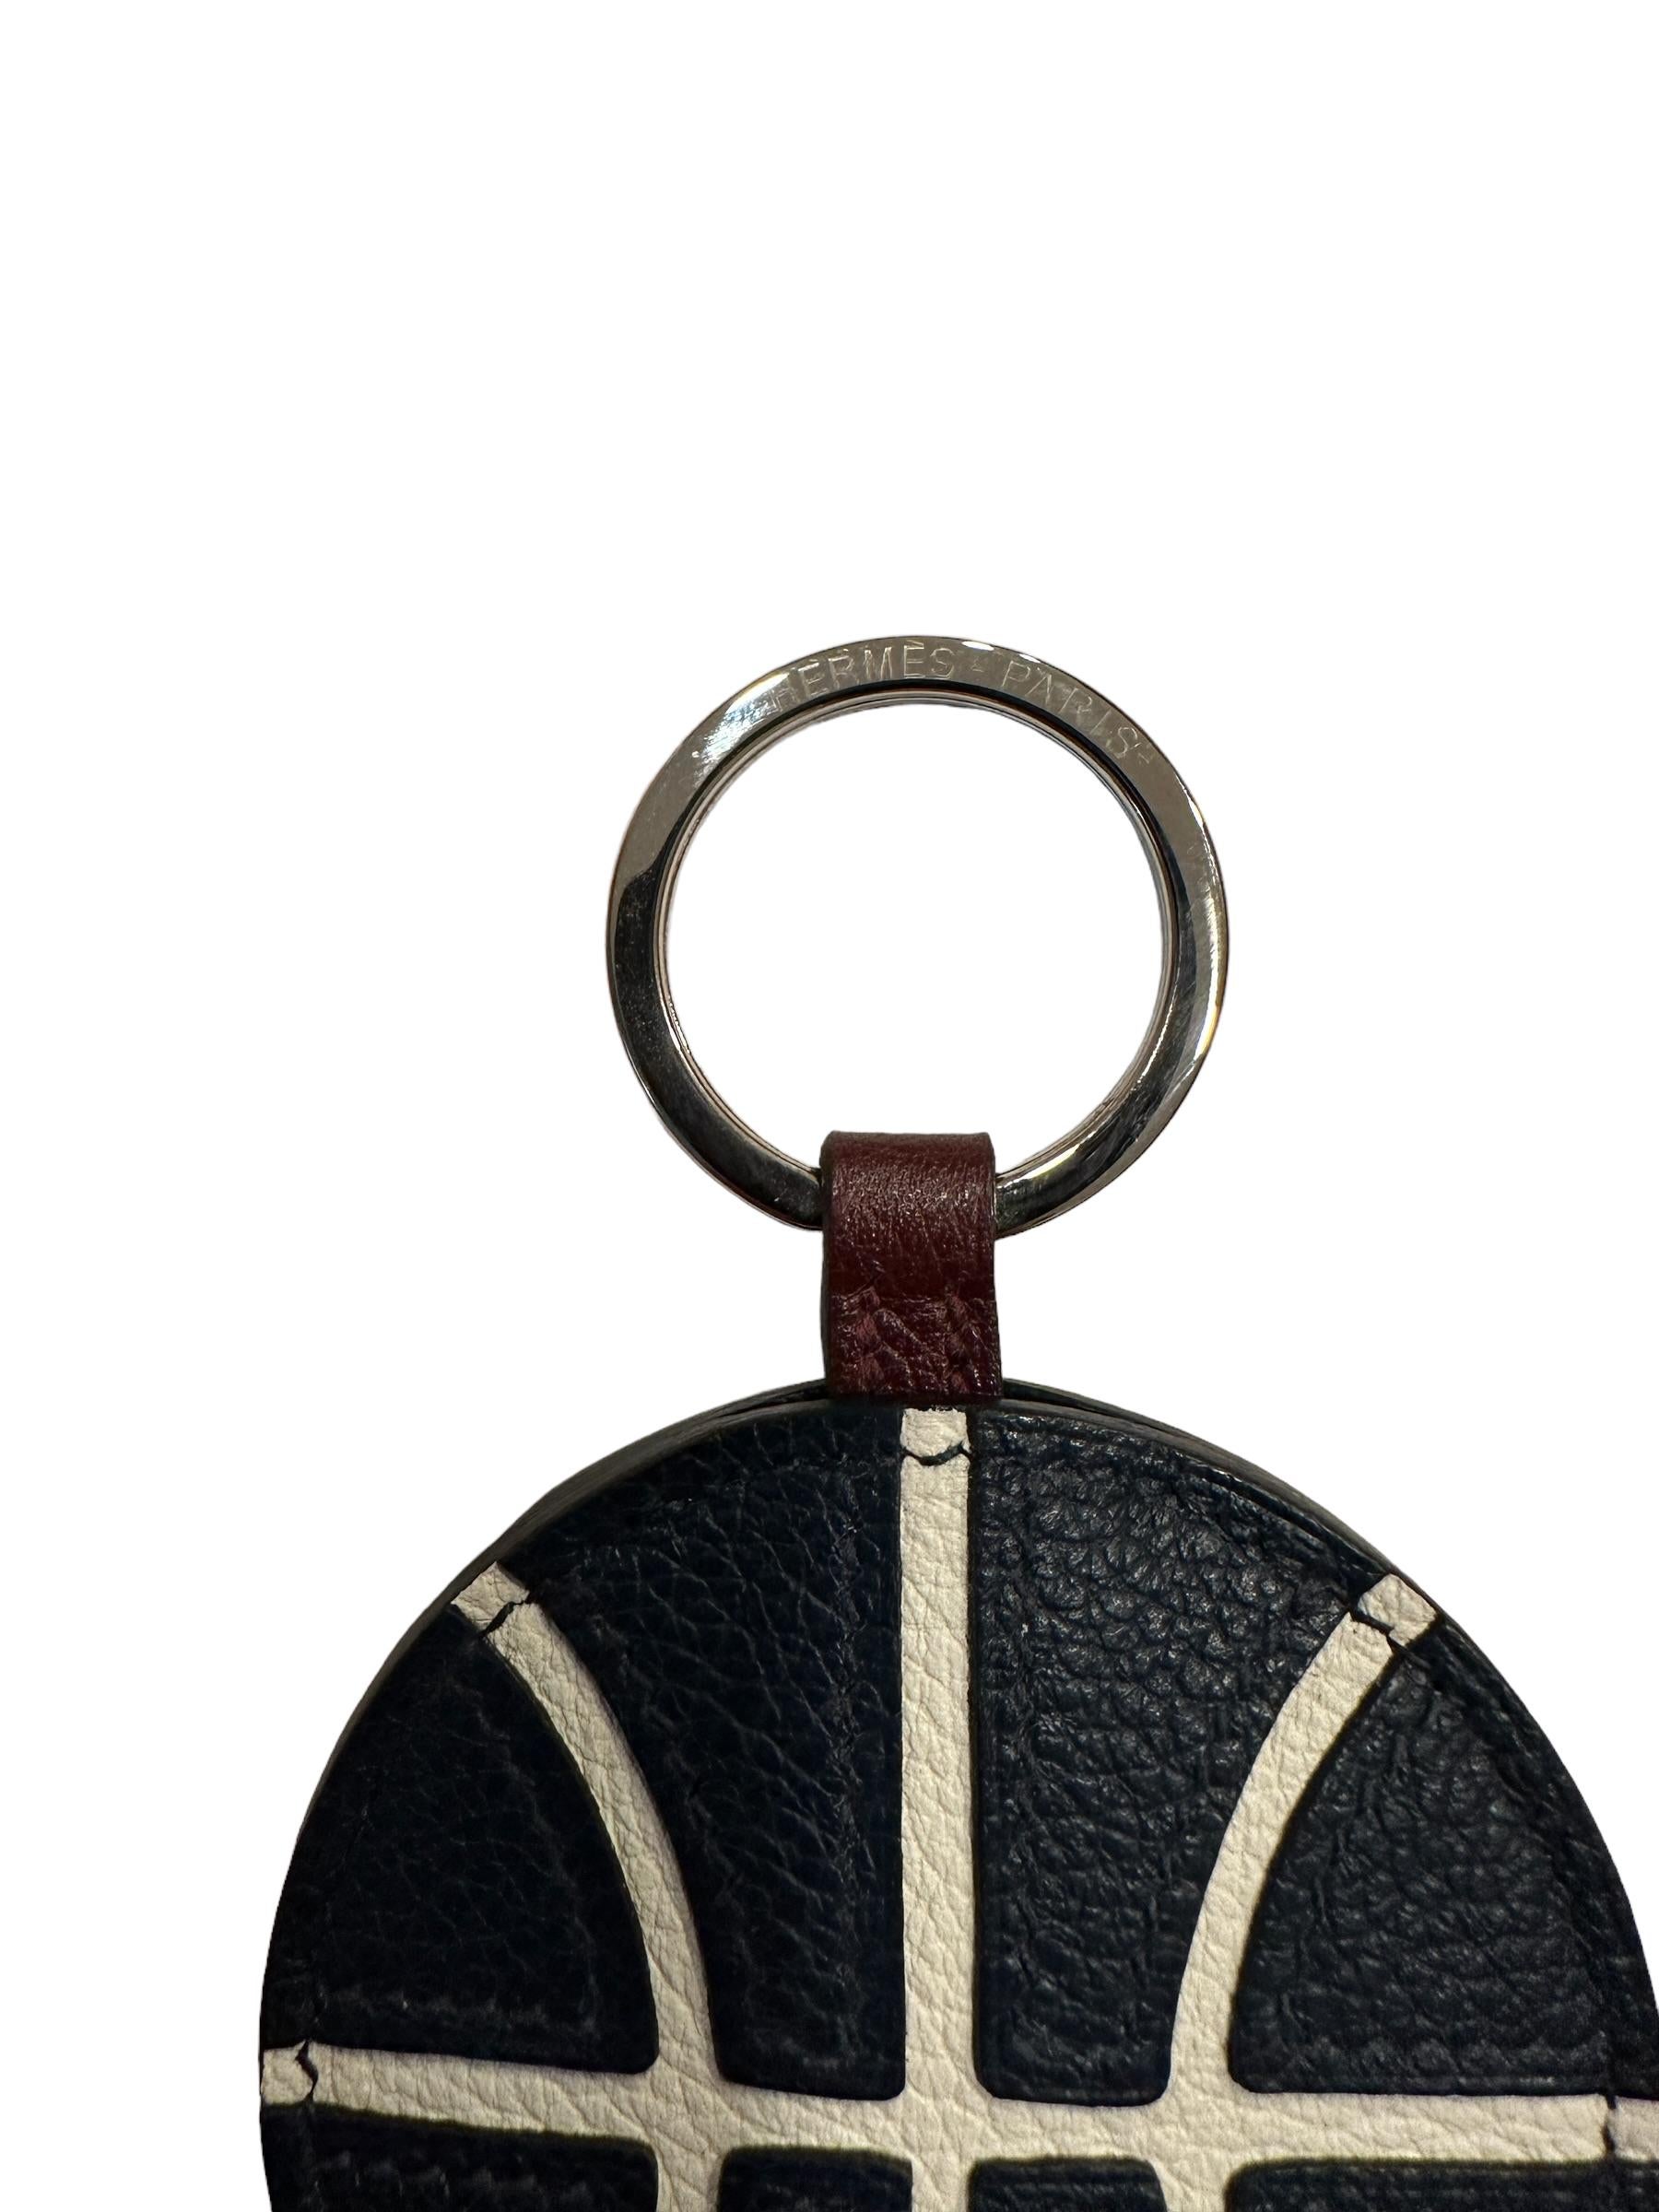 Hermès Basketball Key Ring Collectors Item Bleu De Malte / Blanc / Bordeaux In New Condition For Sale In West Chester, PA